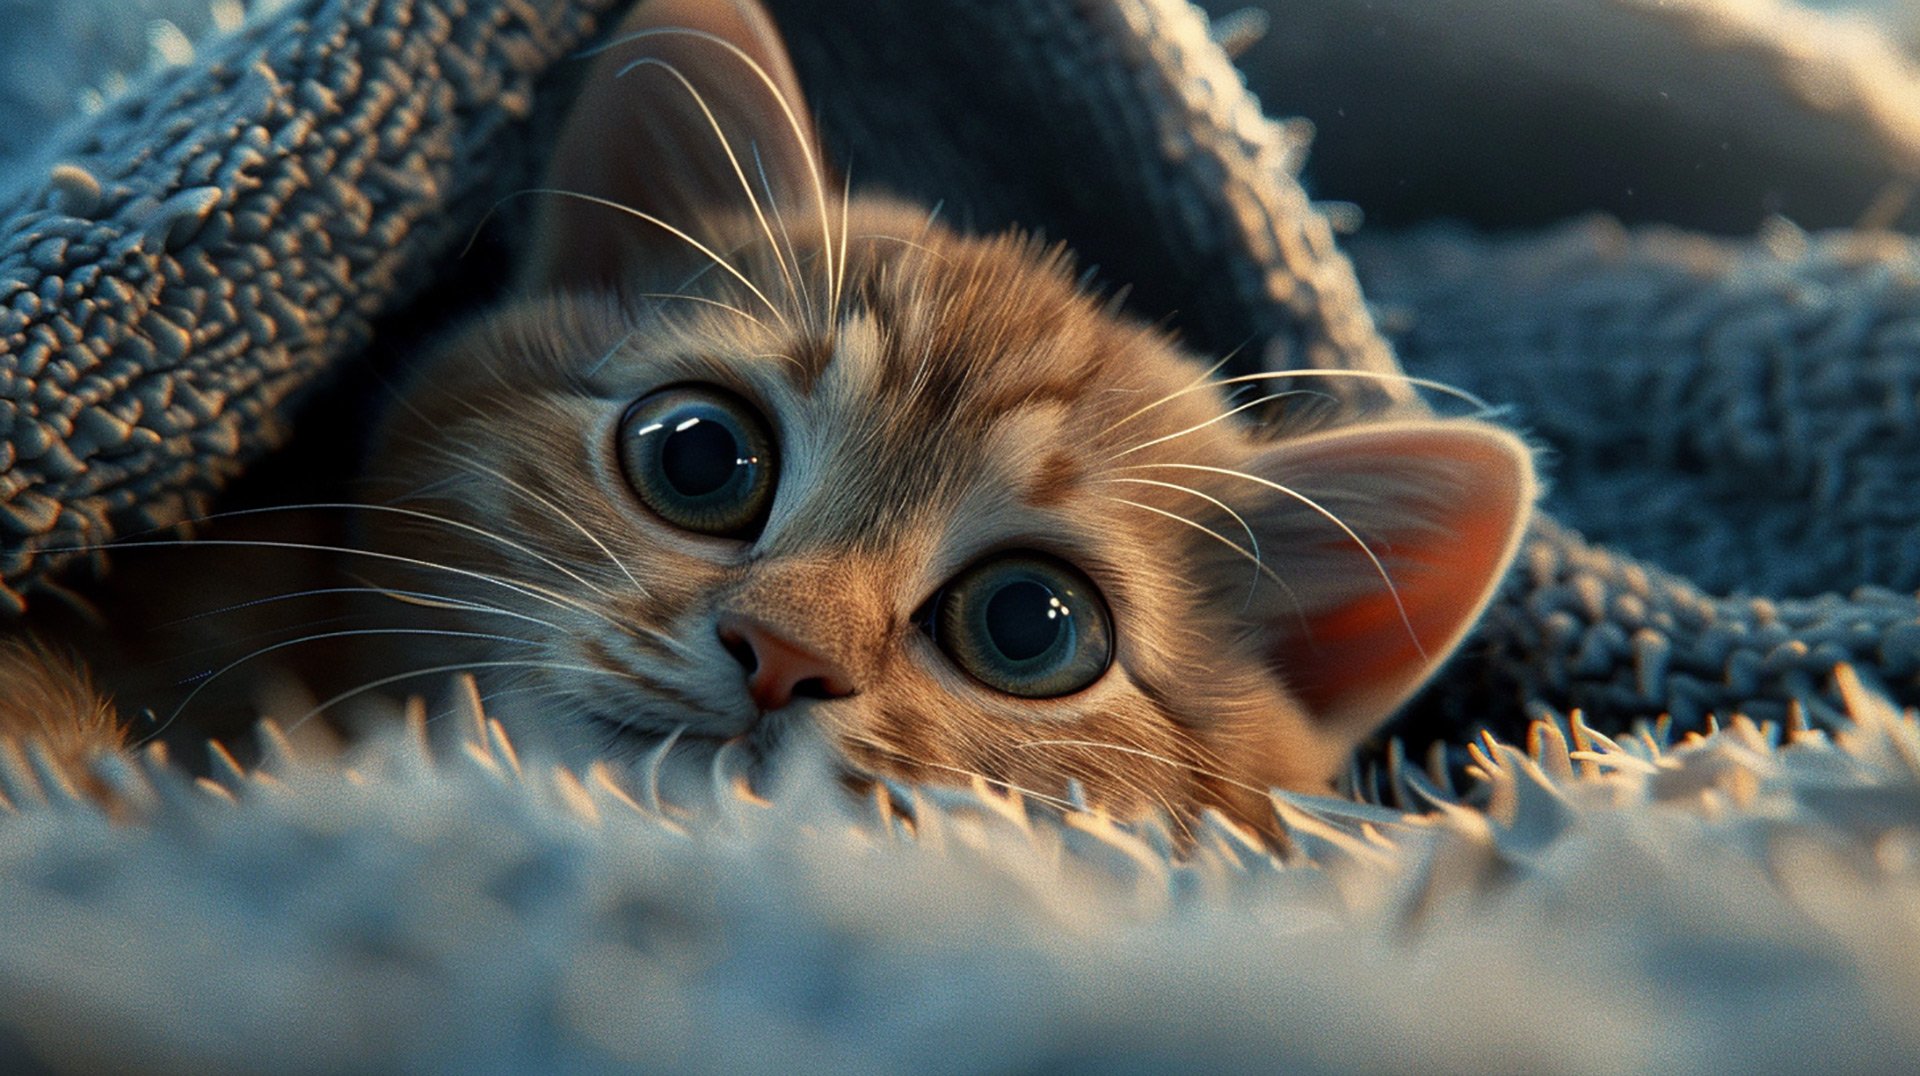 Cute Cat Wallpapers: Download Ultra HD Images for Free